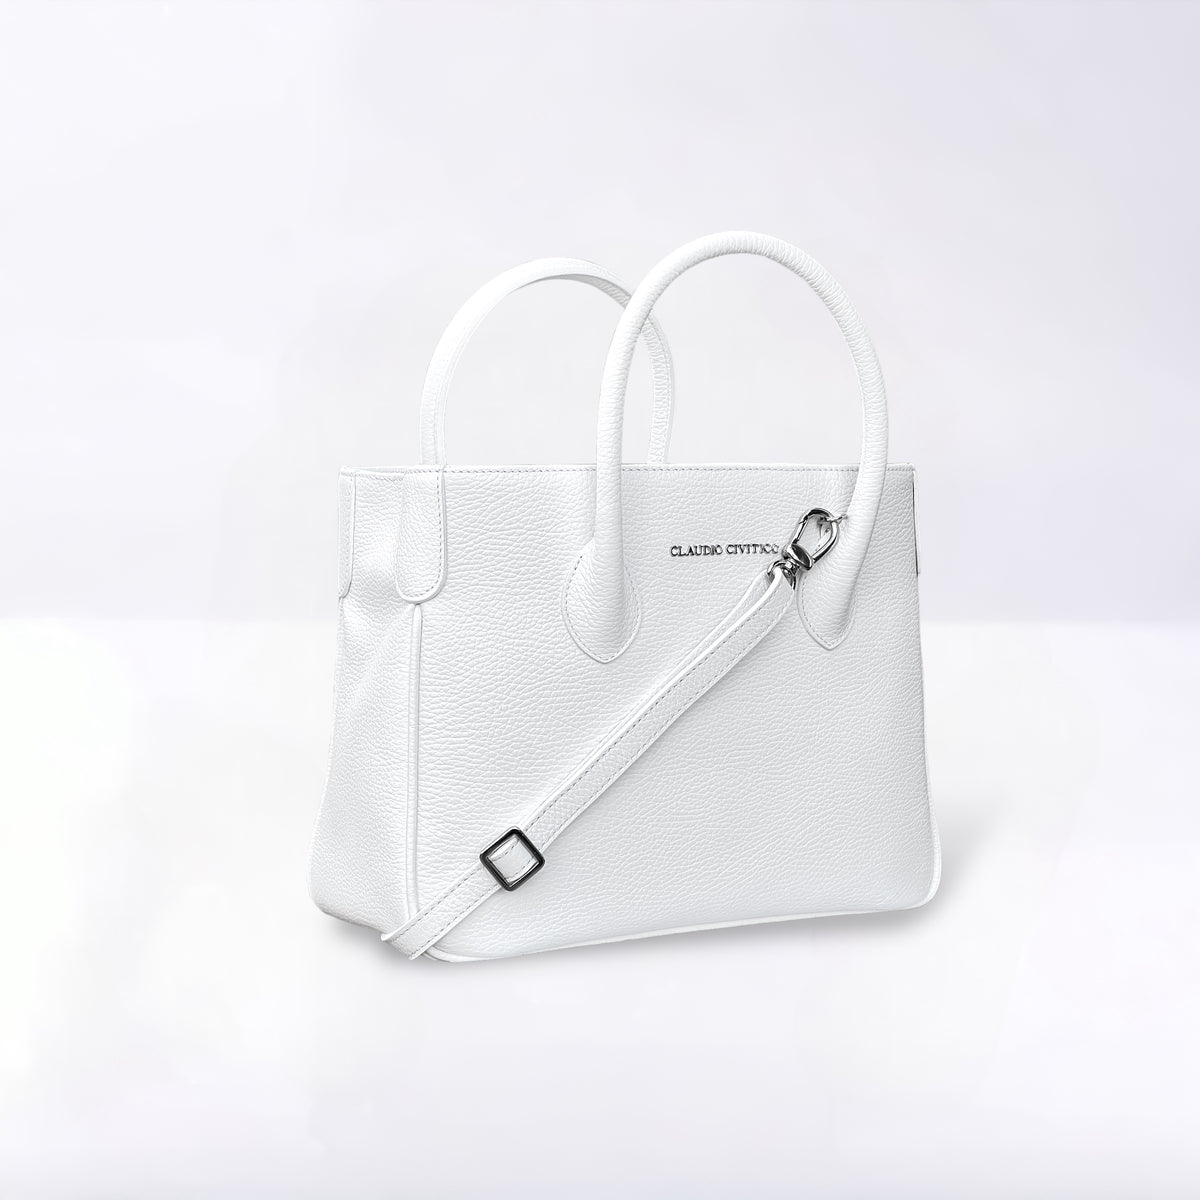 White Satchel purse with silver hardware